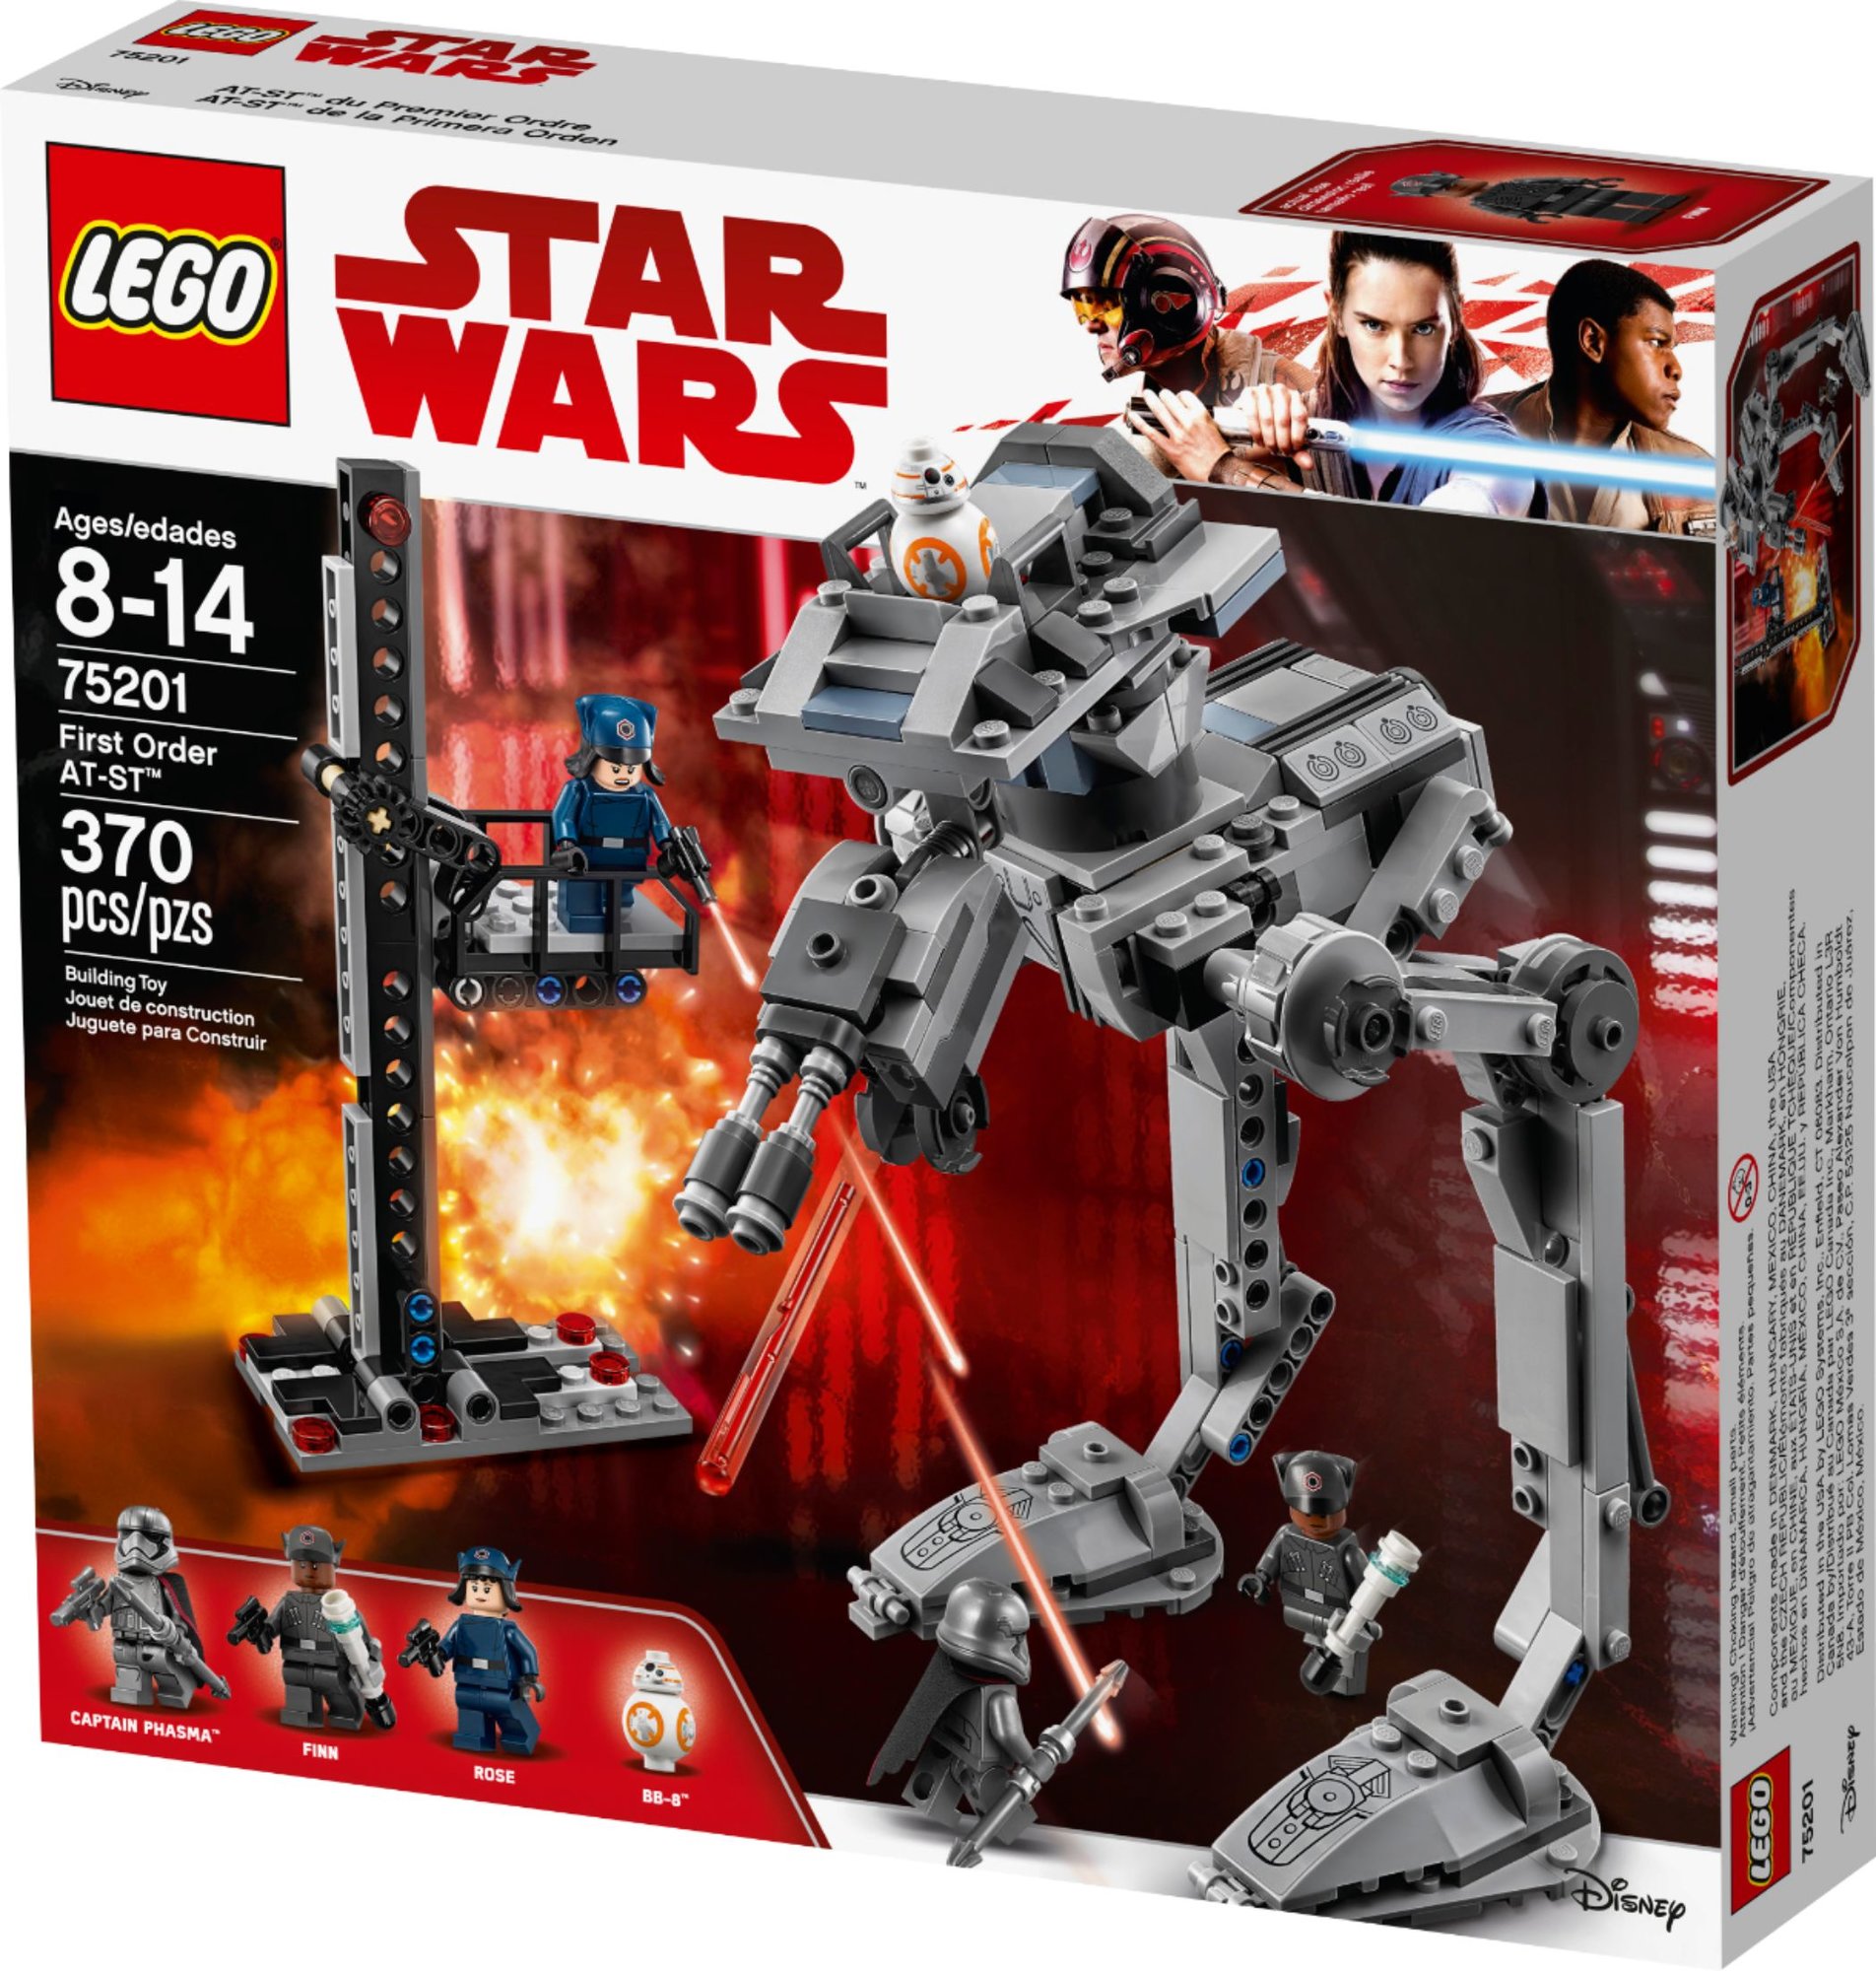 LEGO 75201 Star Wars First Order AT-ST NEW 2018 